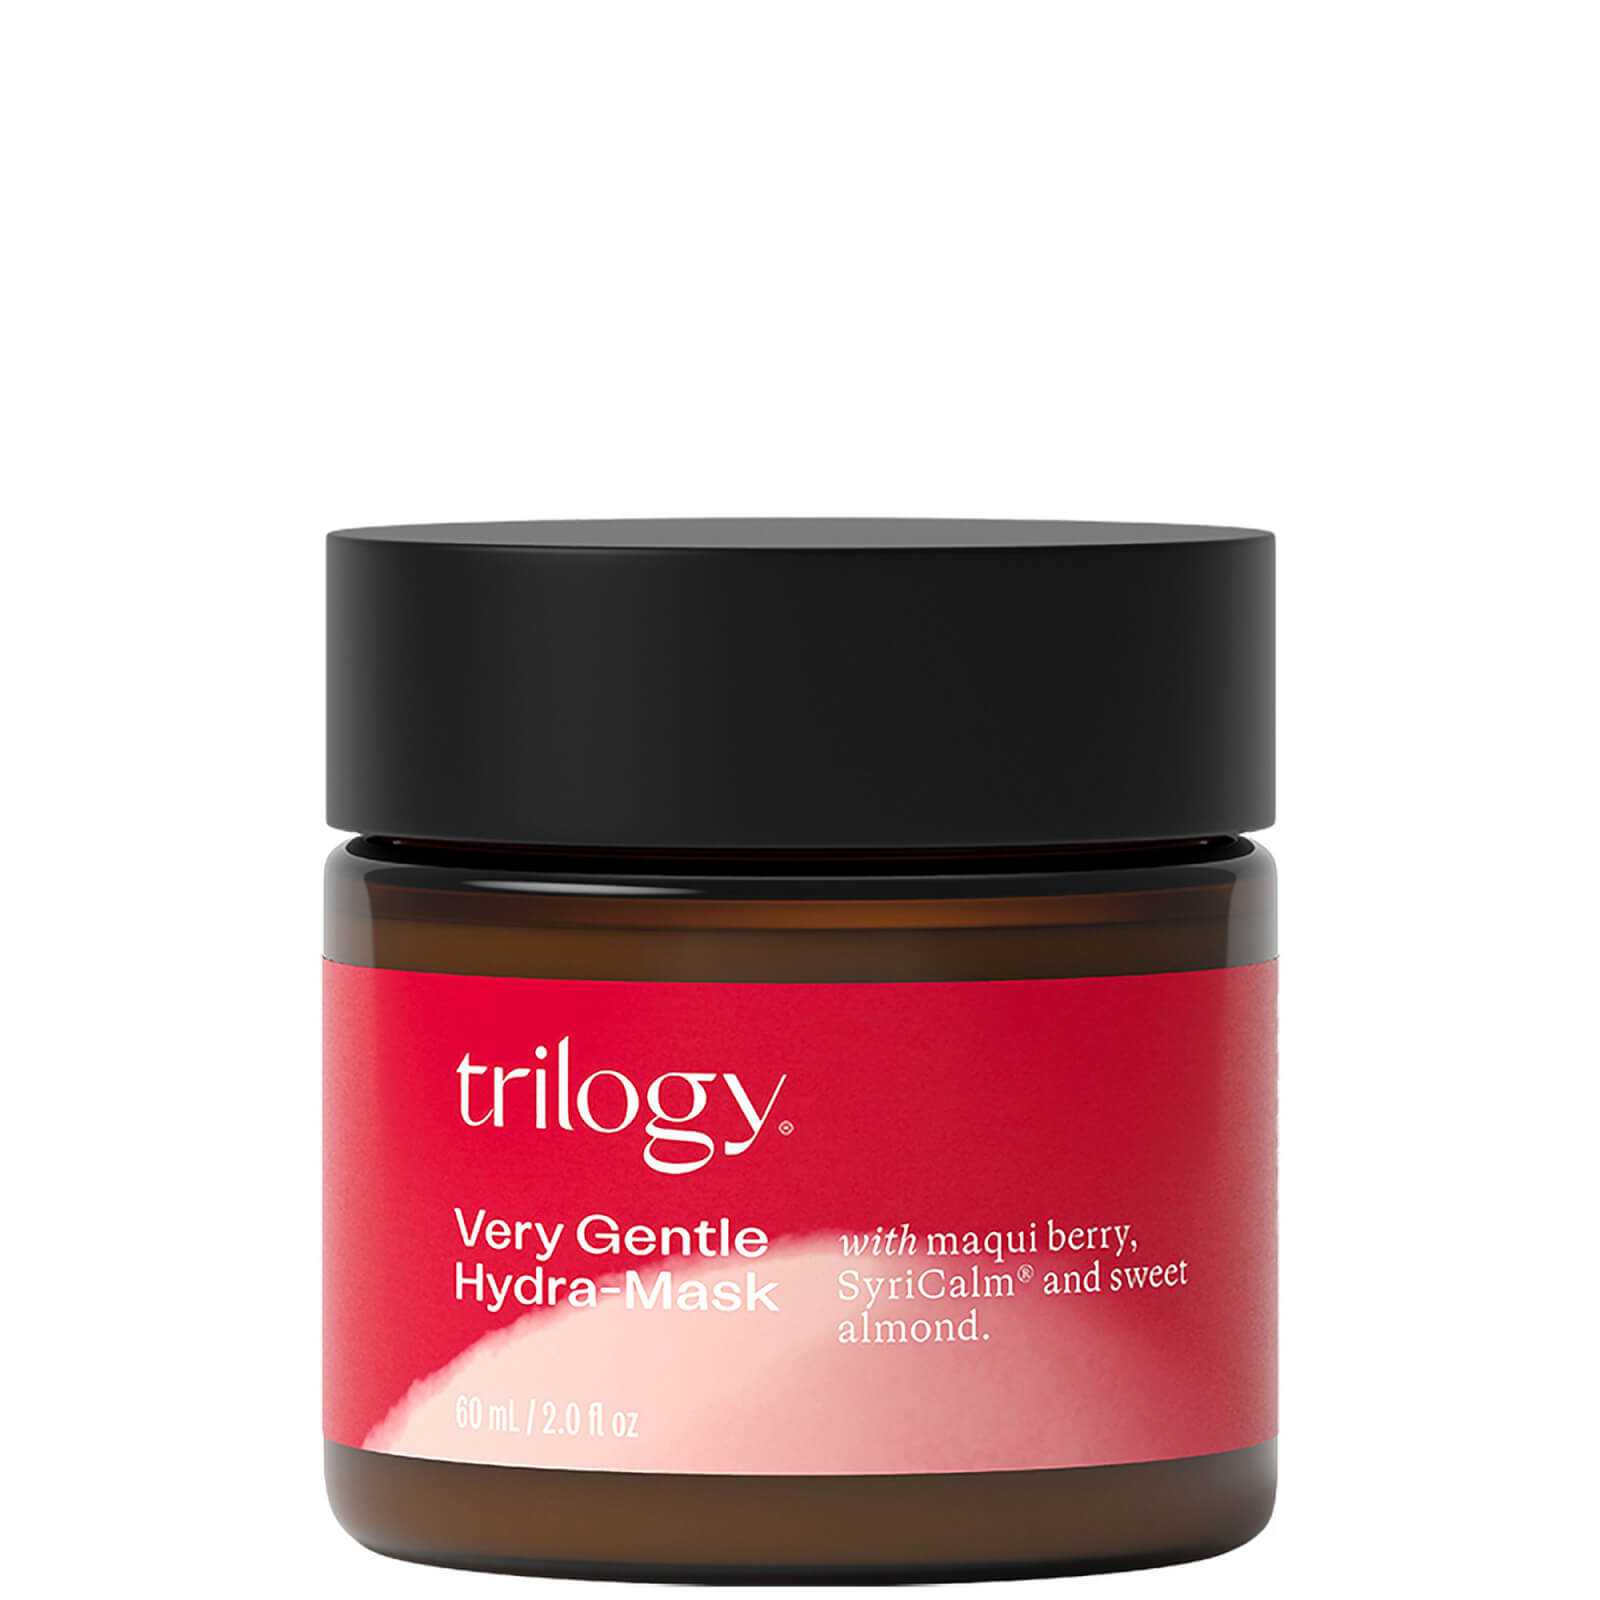 Image of Trilogy Very Gentle Hydra-Mask 60ml